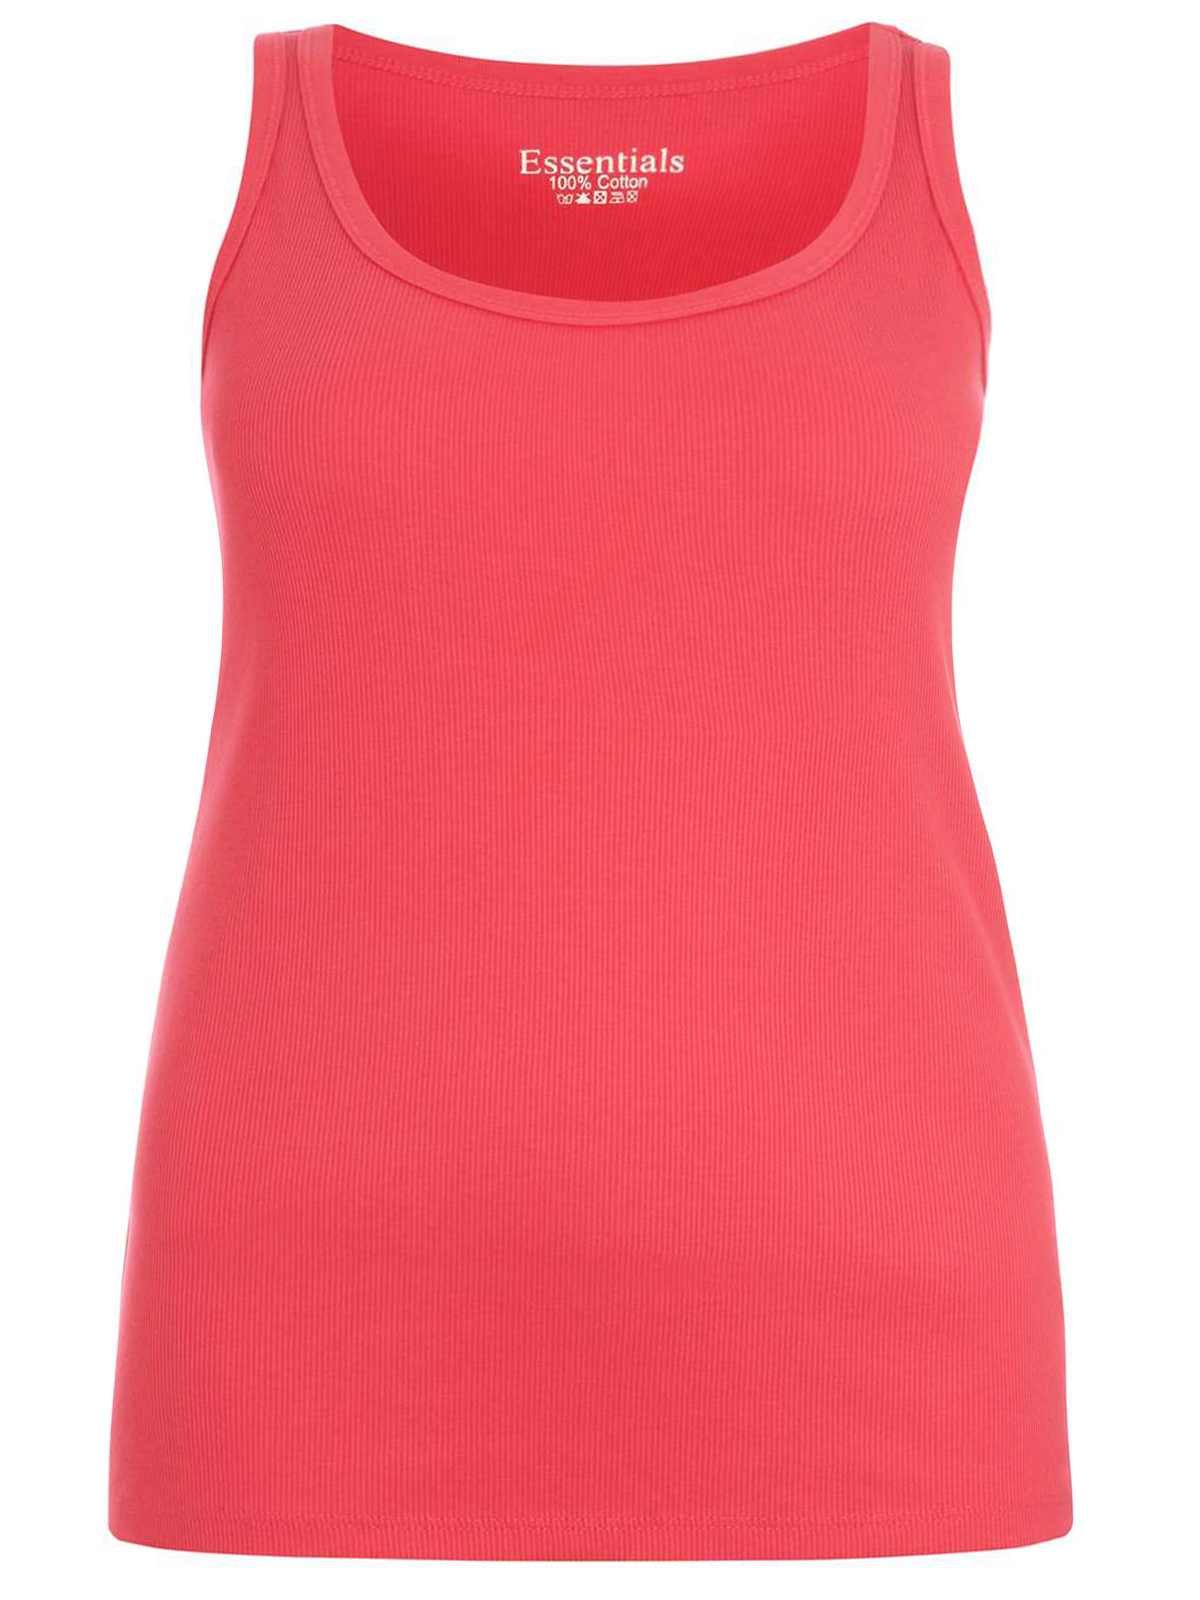 3vans PINK Pure Cotton Ribbed Sleeveless Vest - Plus Size 20 to 26/28